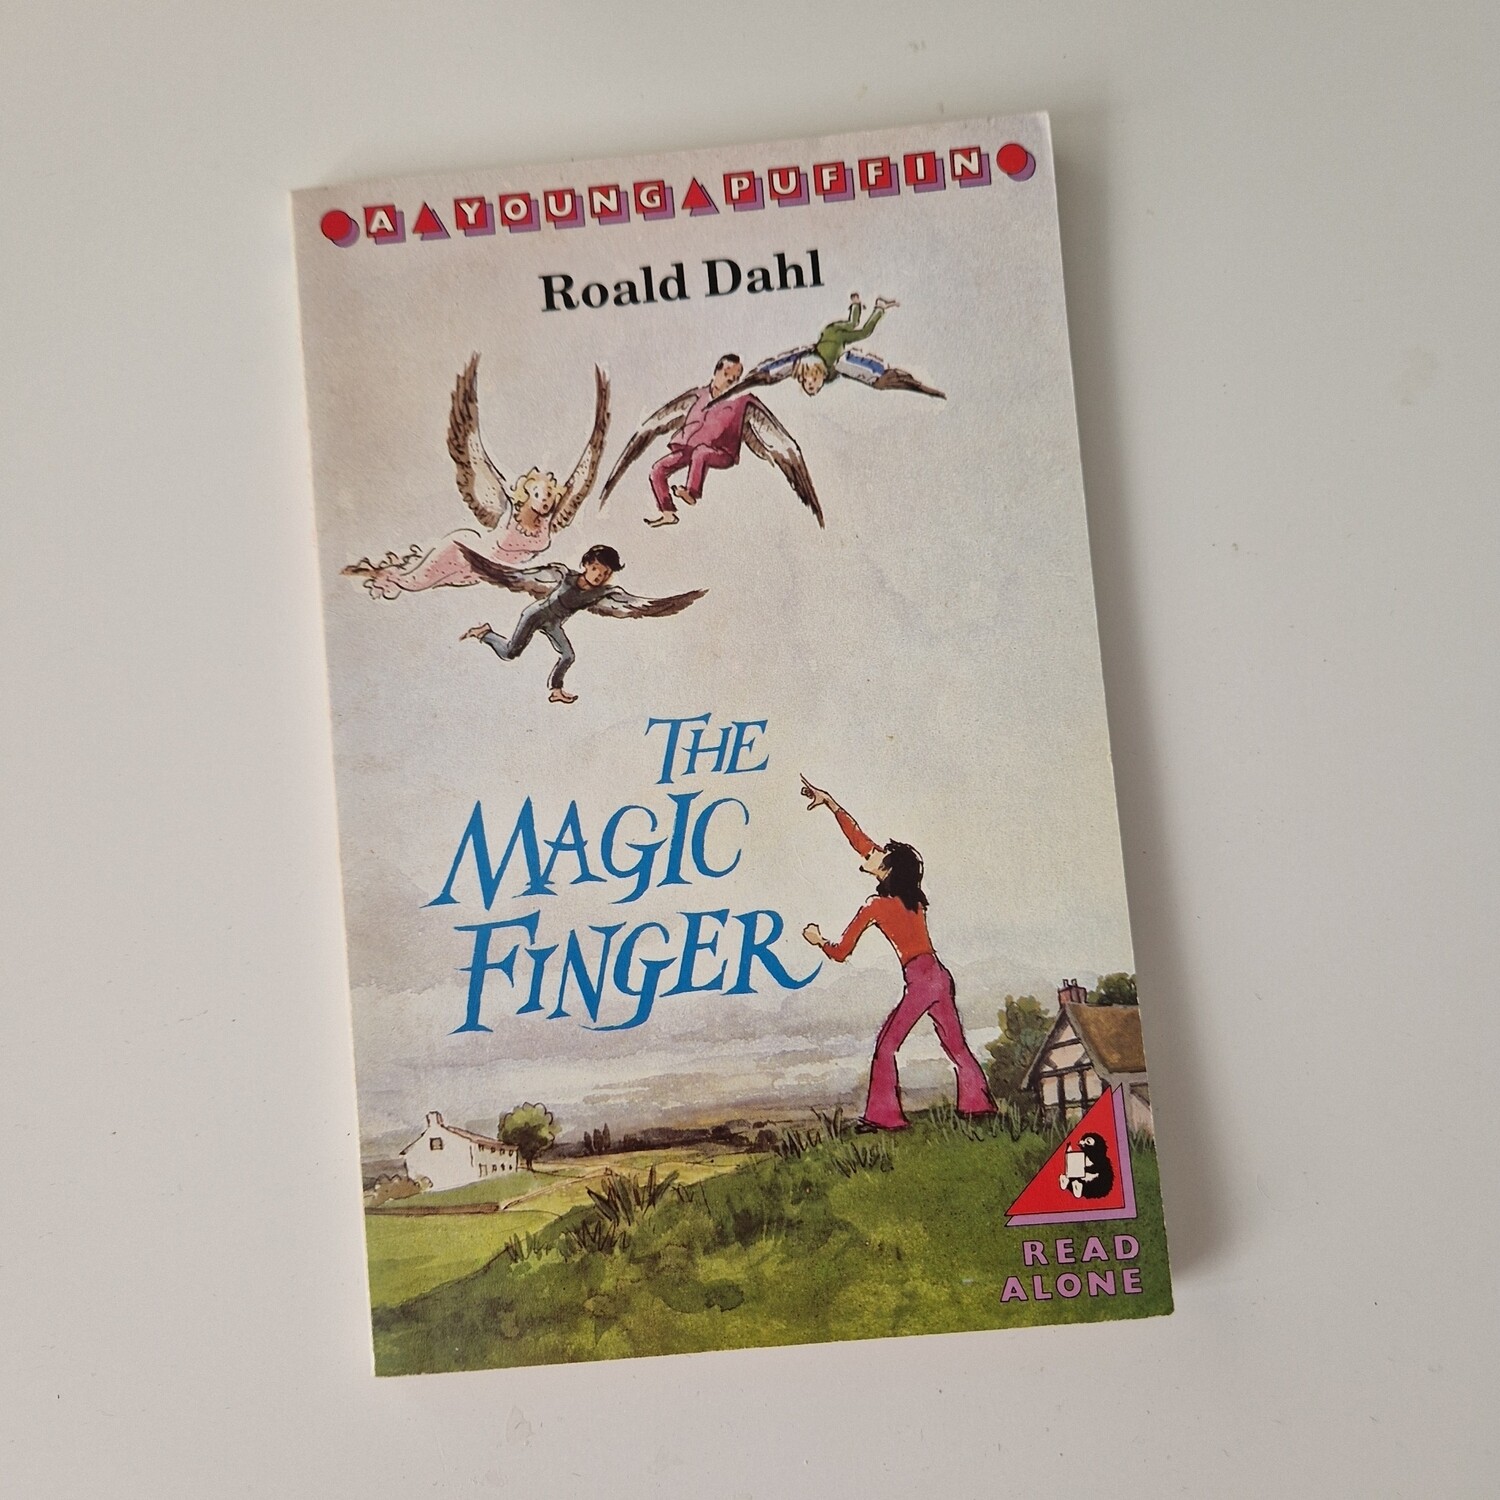 The Magic Finger Roald Dahl Notebook - made from a paperback book